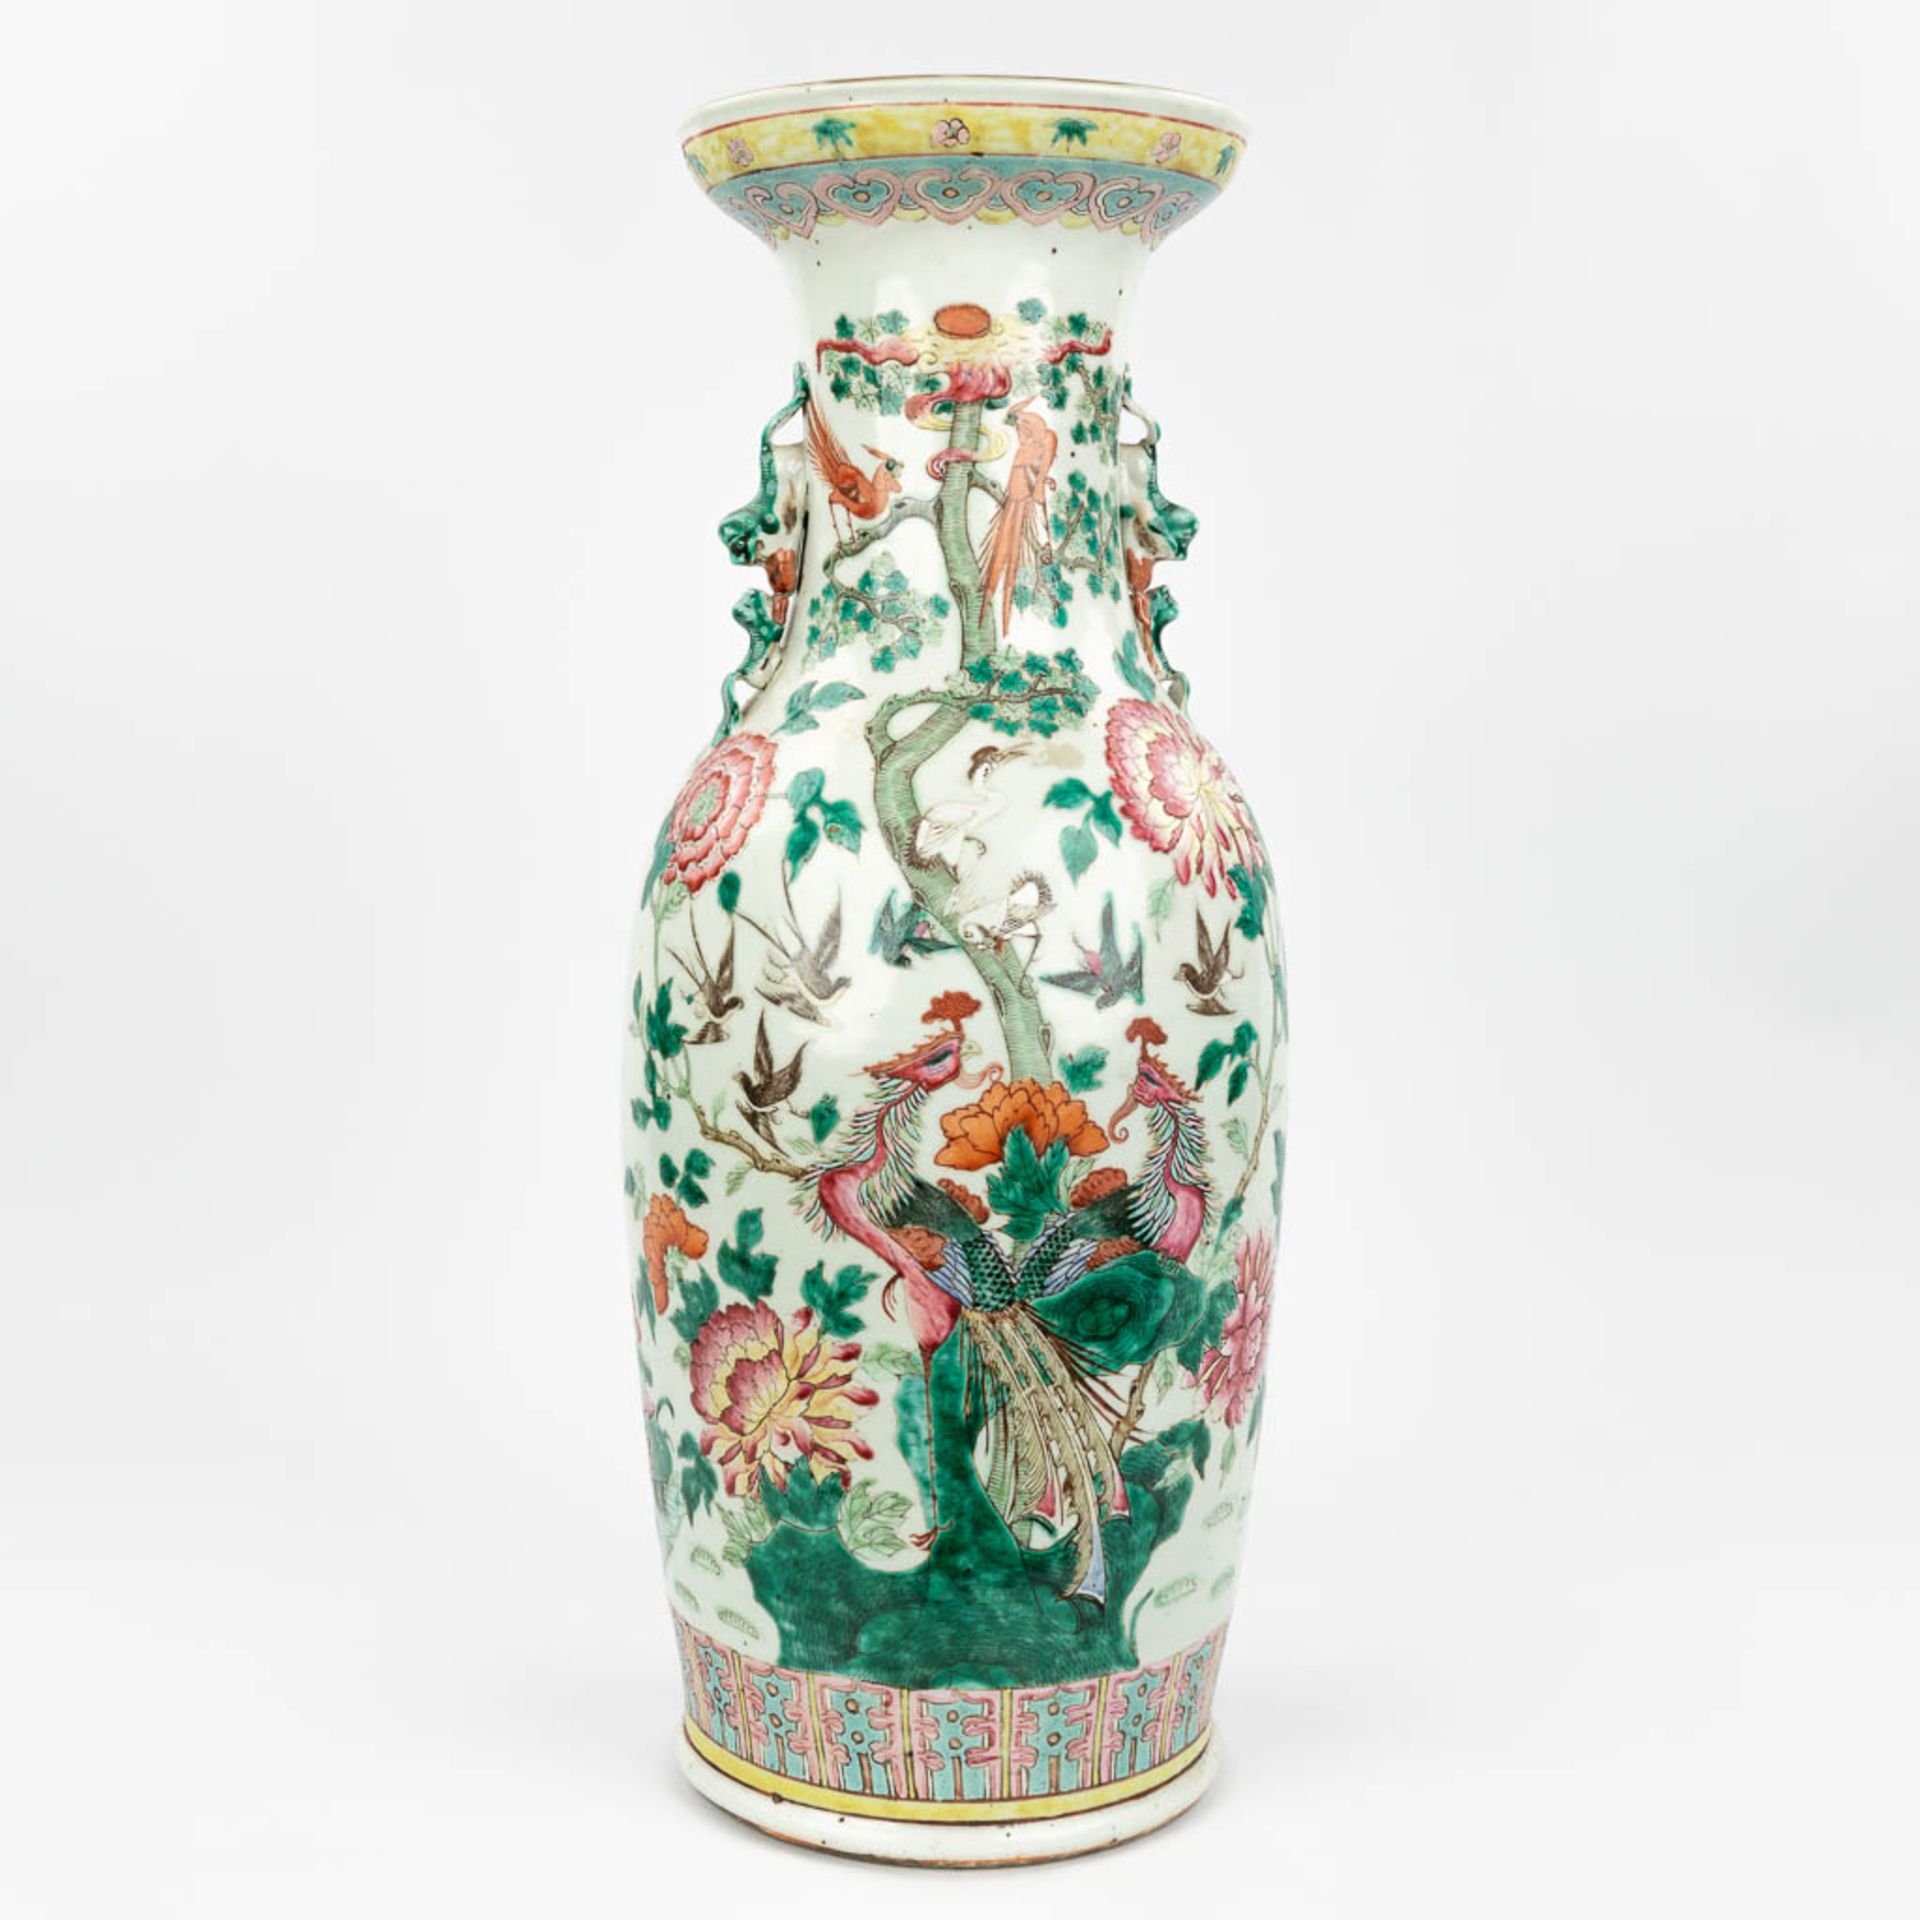 A Chinese vase made of porcelain, decorated with peacocks and birds. (61,5 x 24 cm) - Image 18 of 18